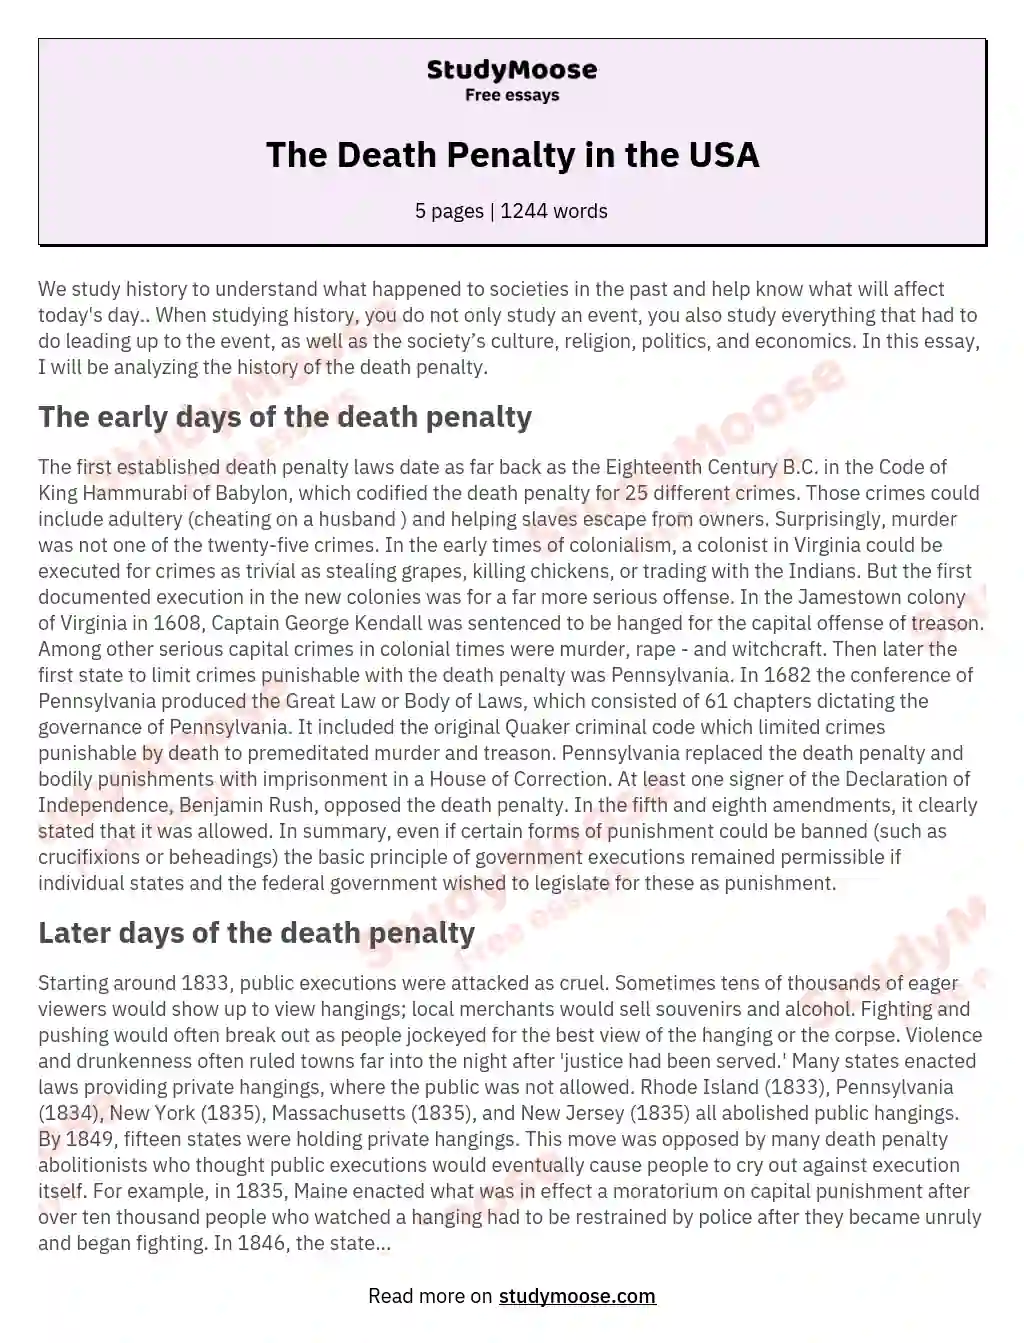 The Death Penalty in the USA essay